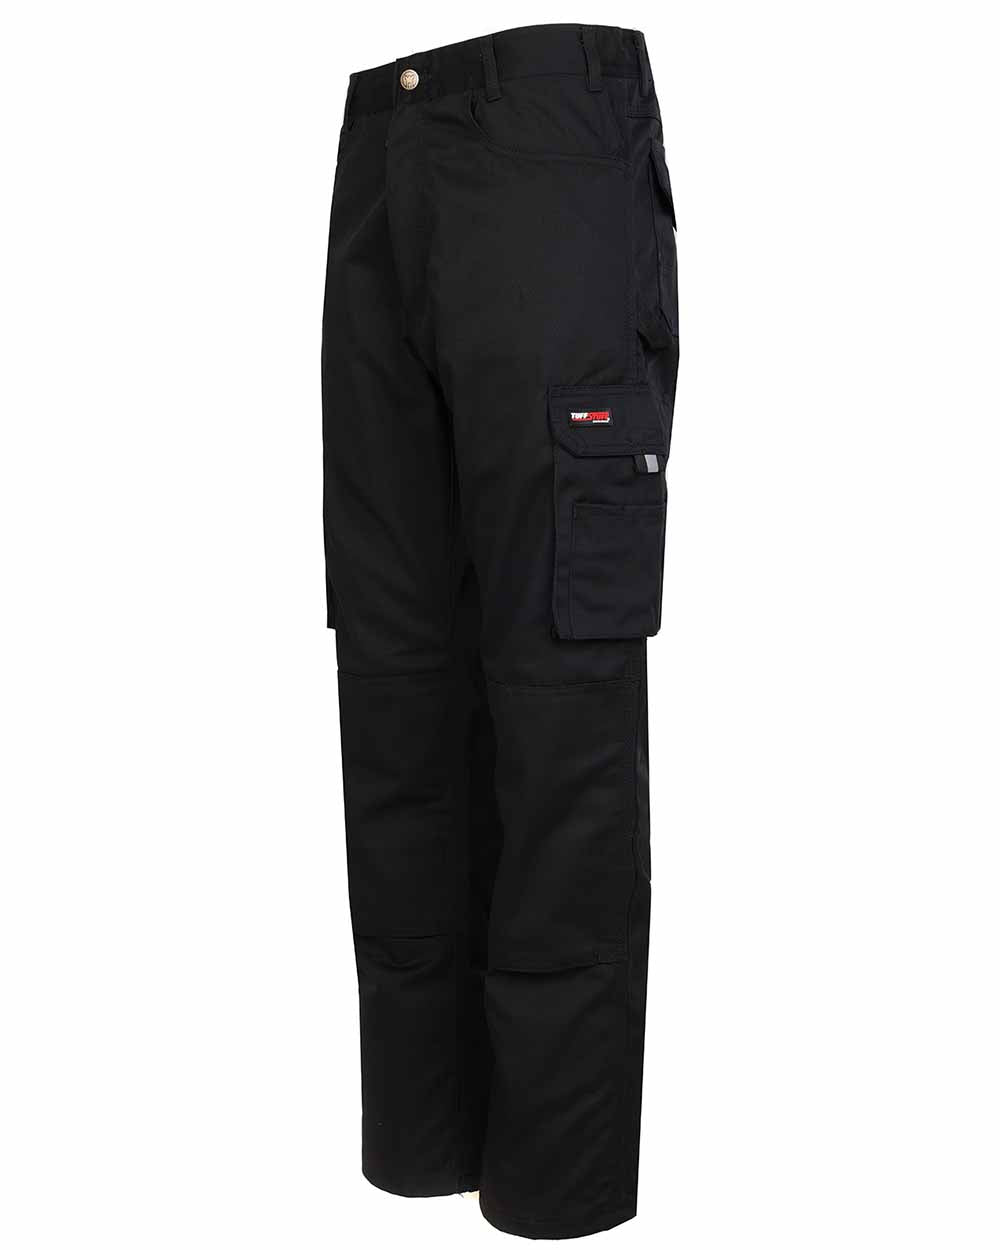 Side view showing hip pockets TuffStuff Pro Work Trousers in Black 